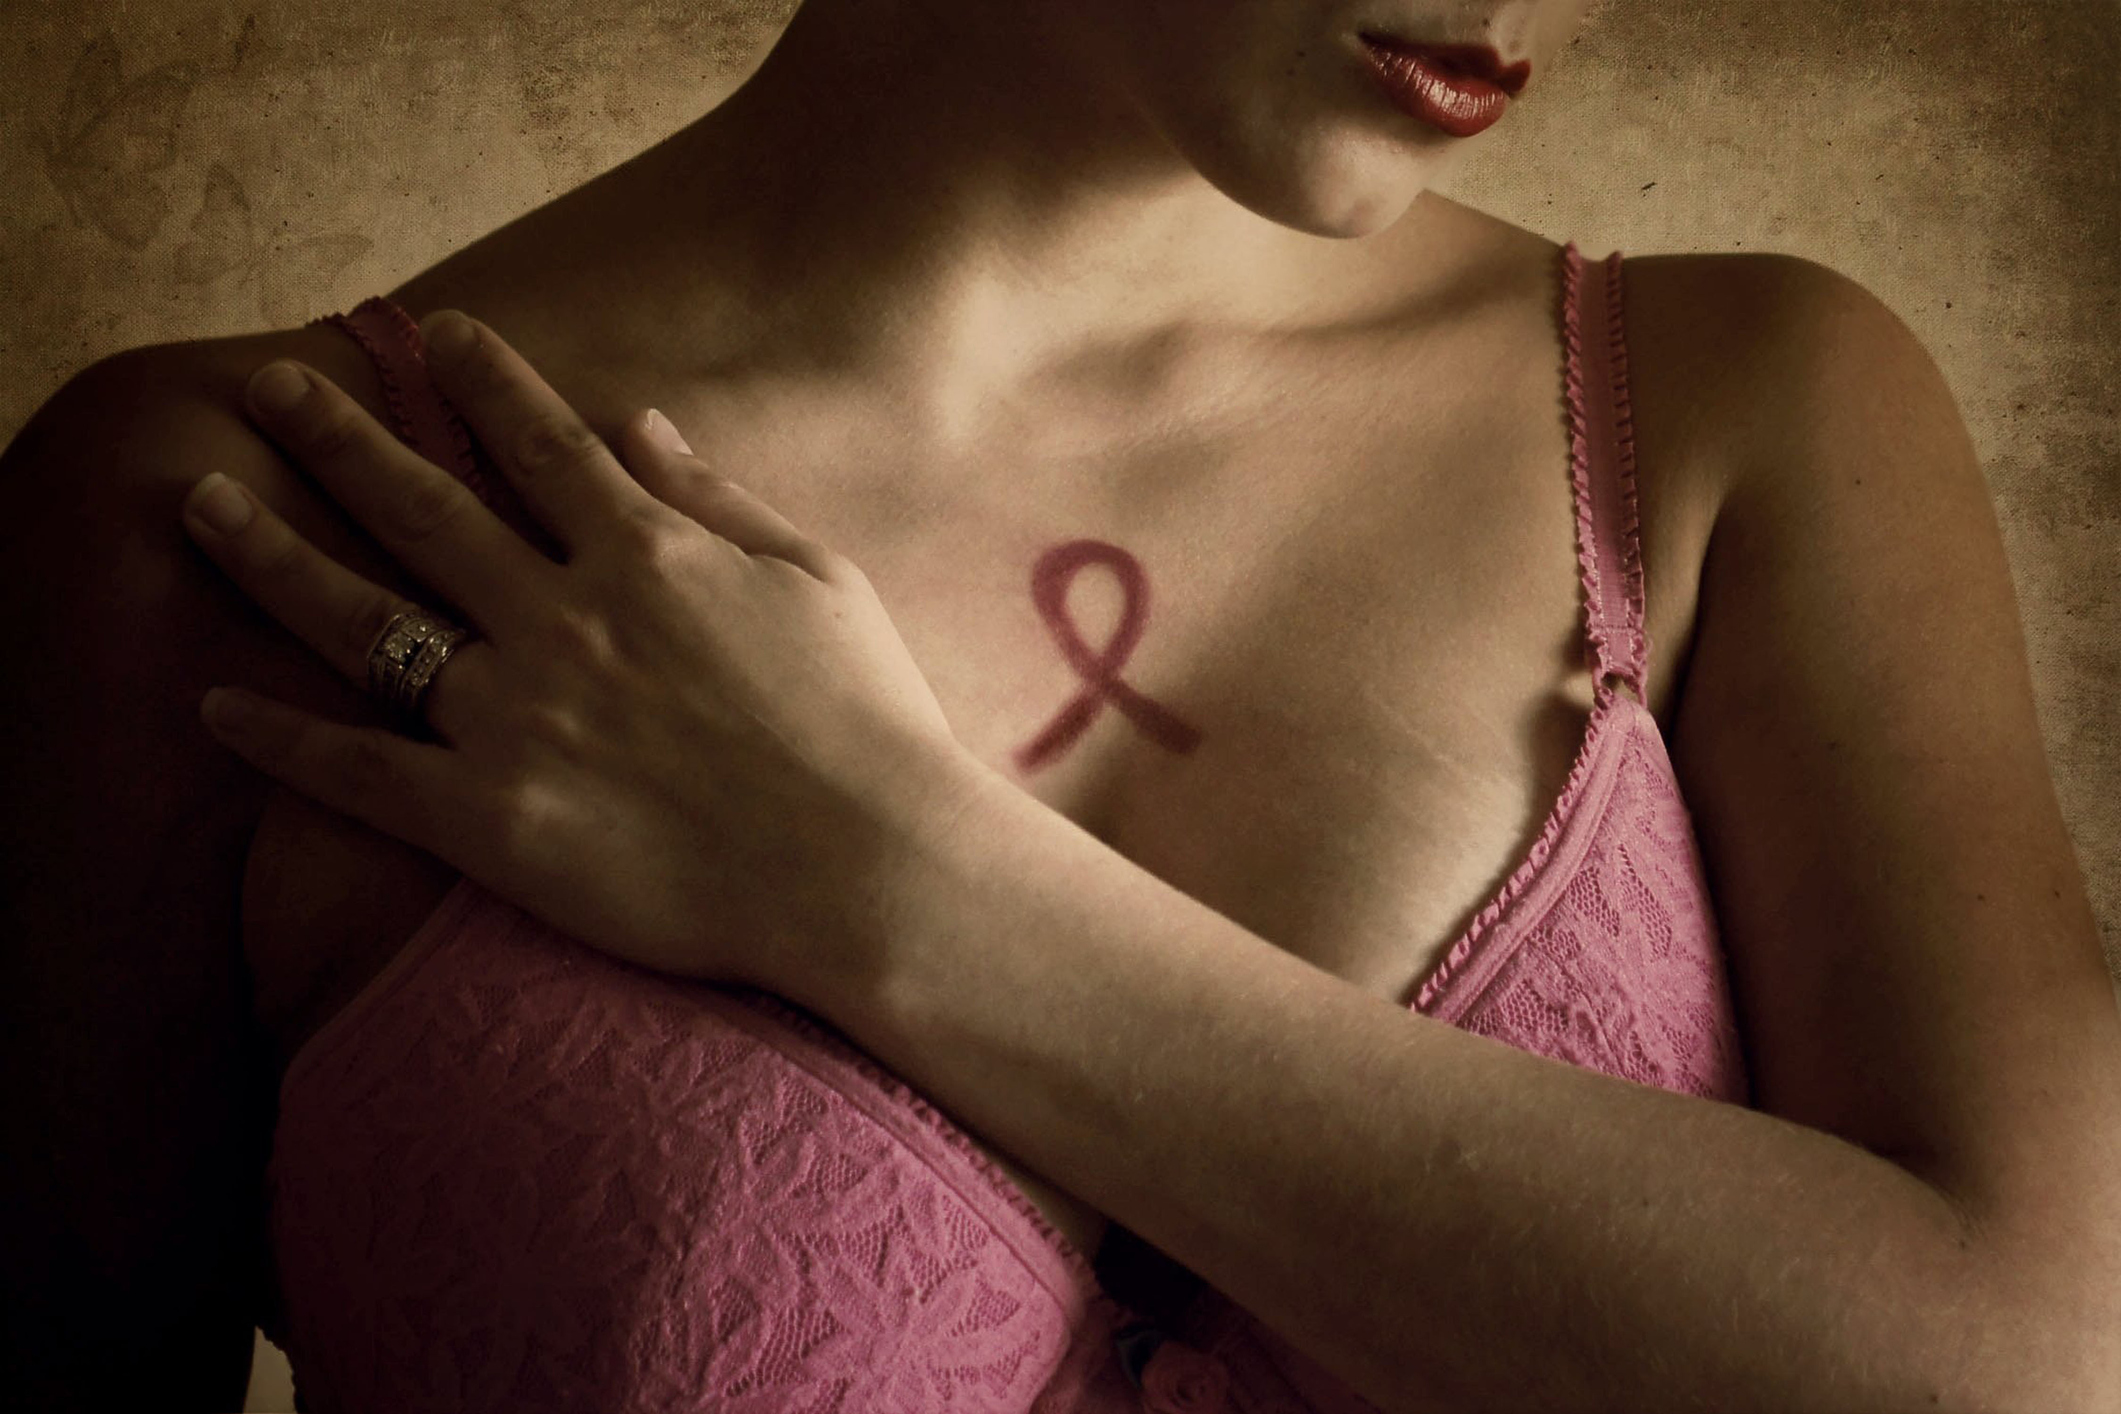 Woman in pink bra representing breast cancer awareness month.